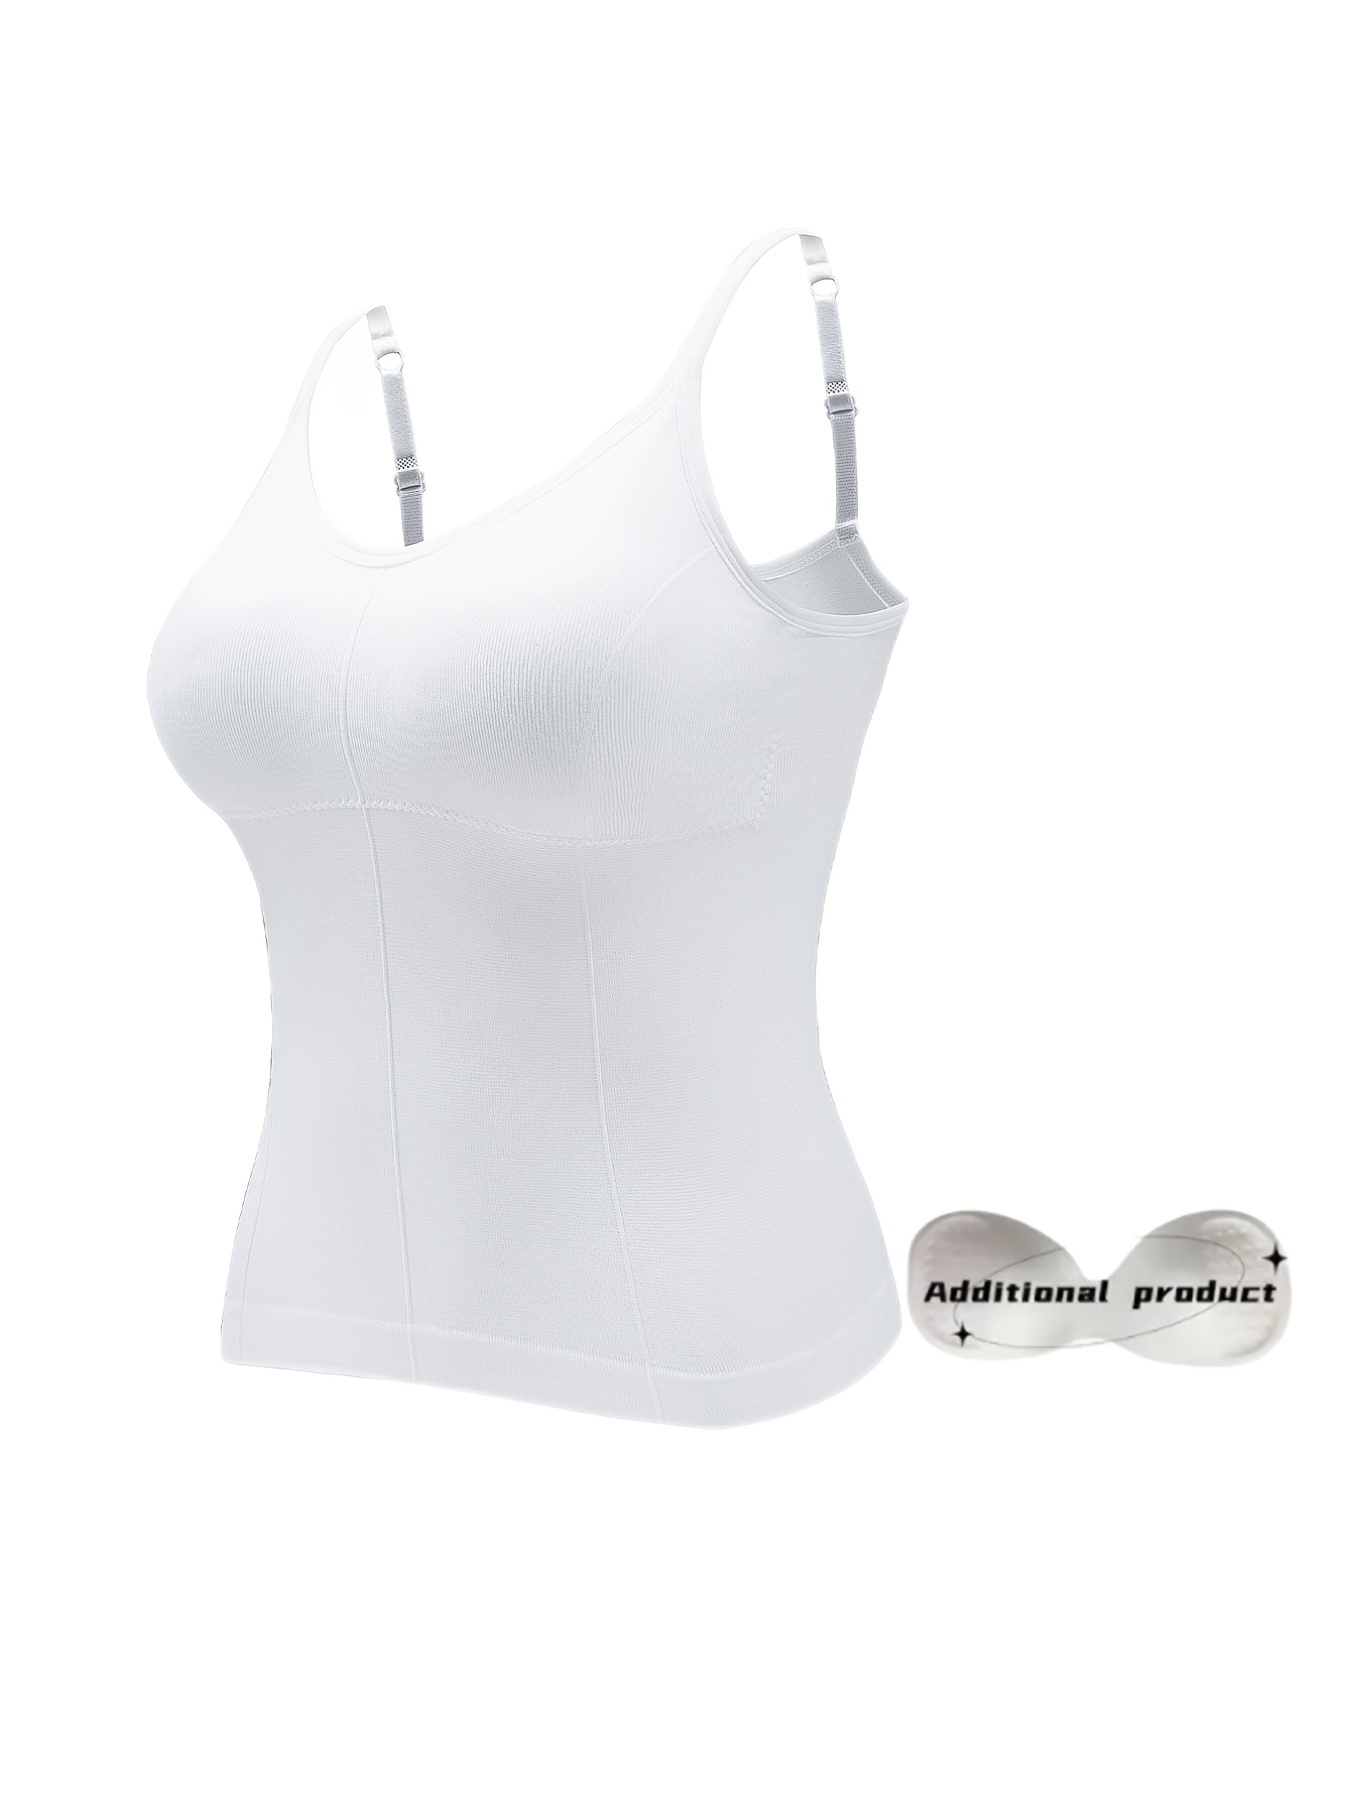 Fashion (white)Women Padded Soft Casual Bra Tank Top Women's Spaghetti Cami  Top Vest Female Camisole With Built In Bra Summer Breathable Tops WEF @ Best  Price Online